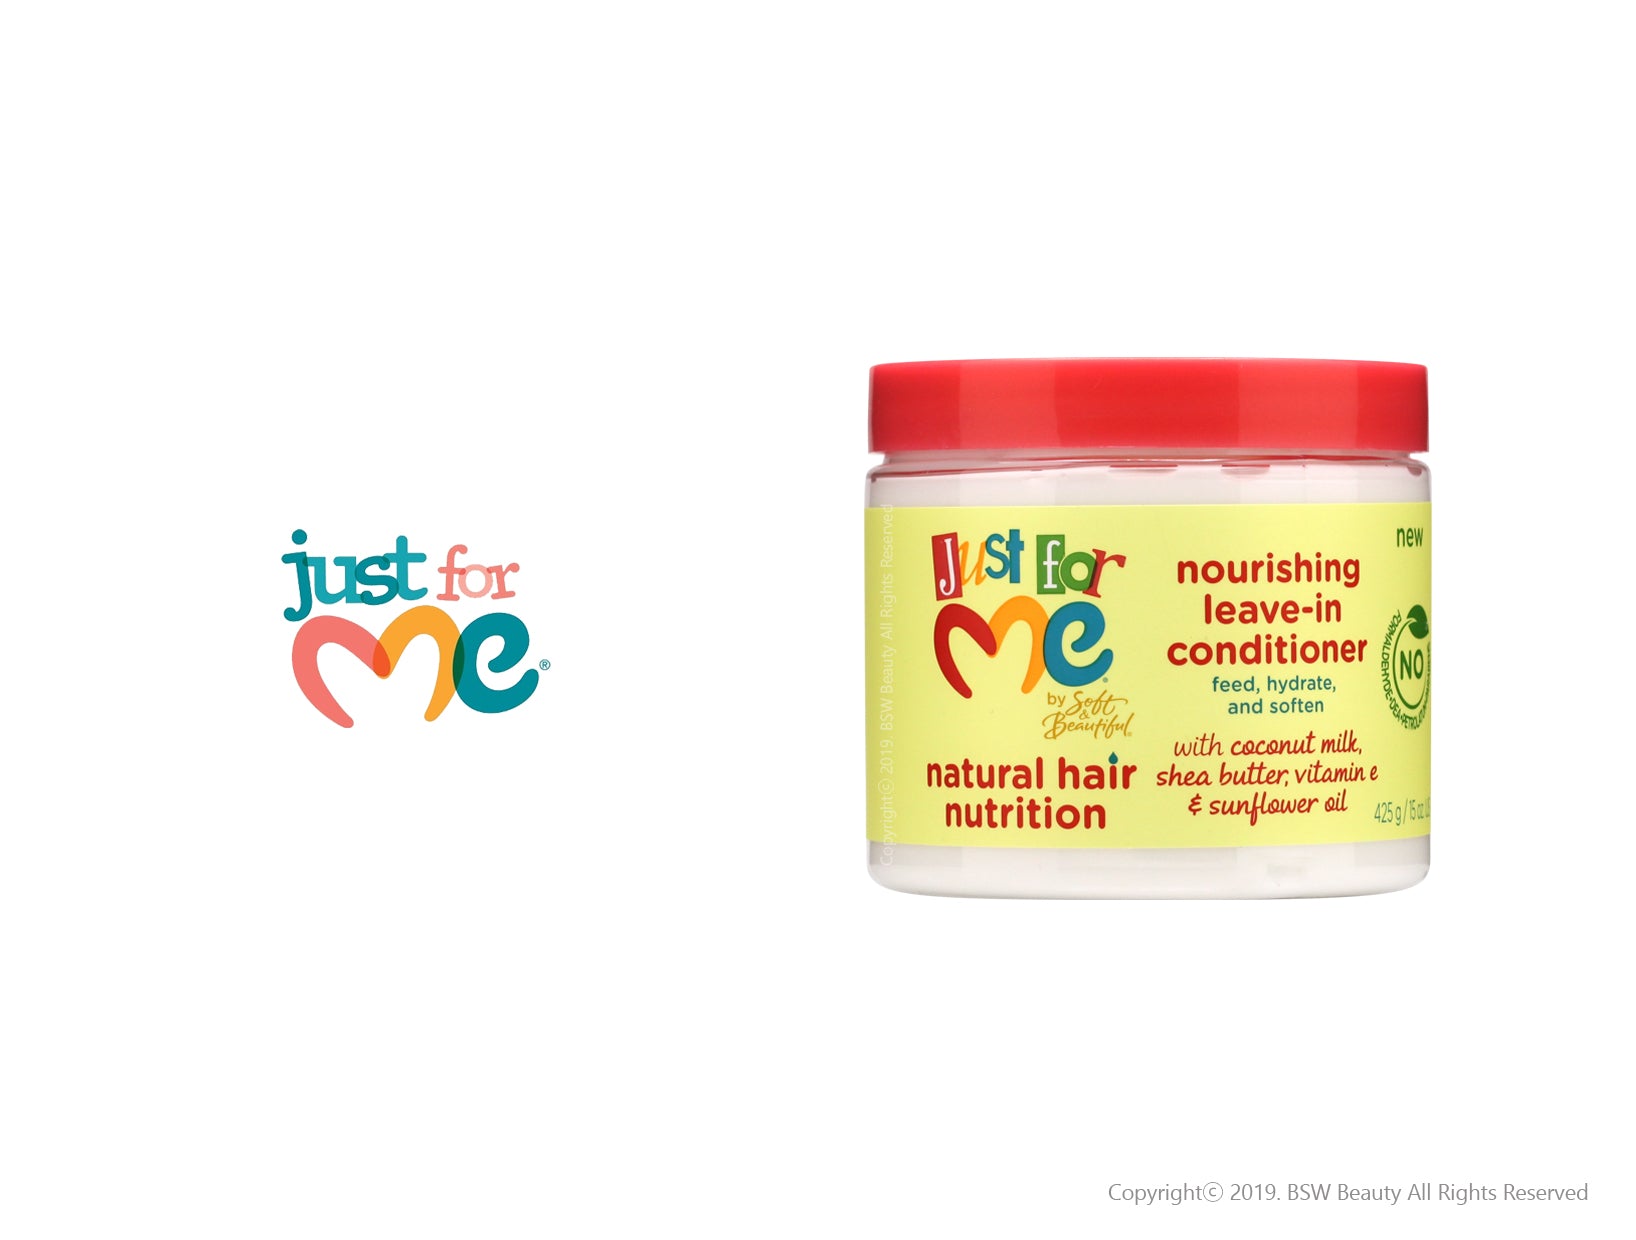 JUST FOR ME NATURAL HAIR NUTRITION NOURISHING LEAVE-IN CONDITIONER 15oz